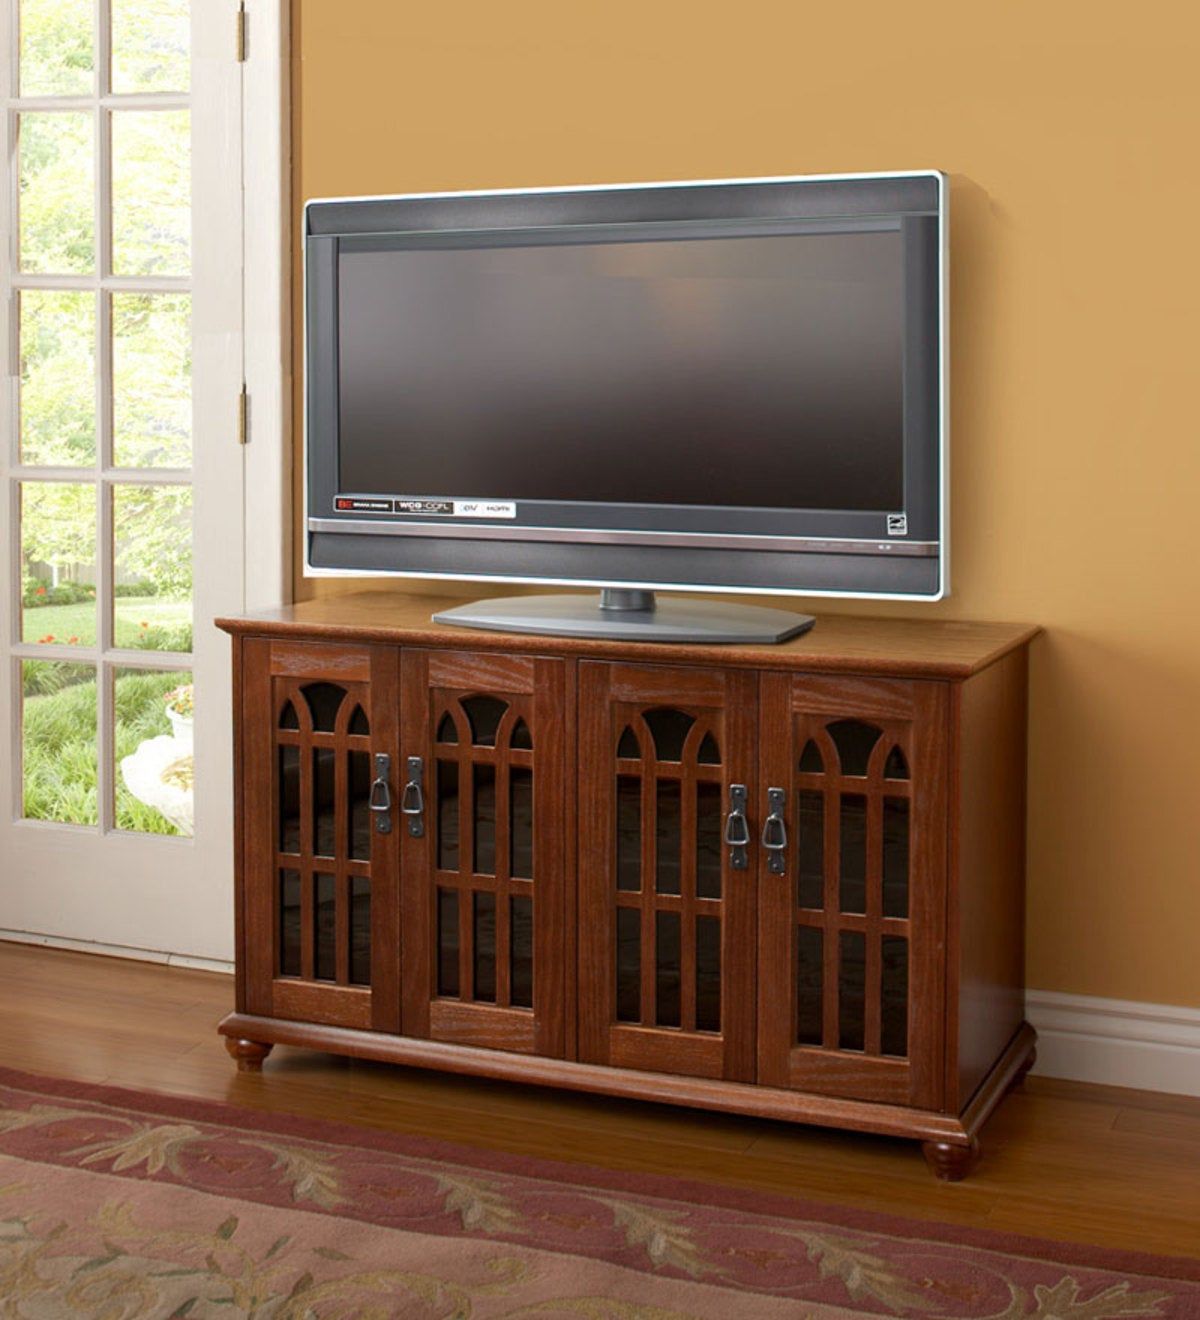 Glass Door Mission Style Flat Panel & Plasma Tv Cabinet Intended For Narrow Tv Stands For Flat Screens (View 11 of 15)